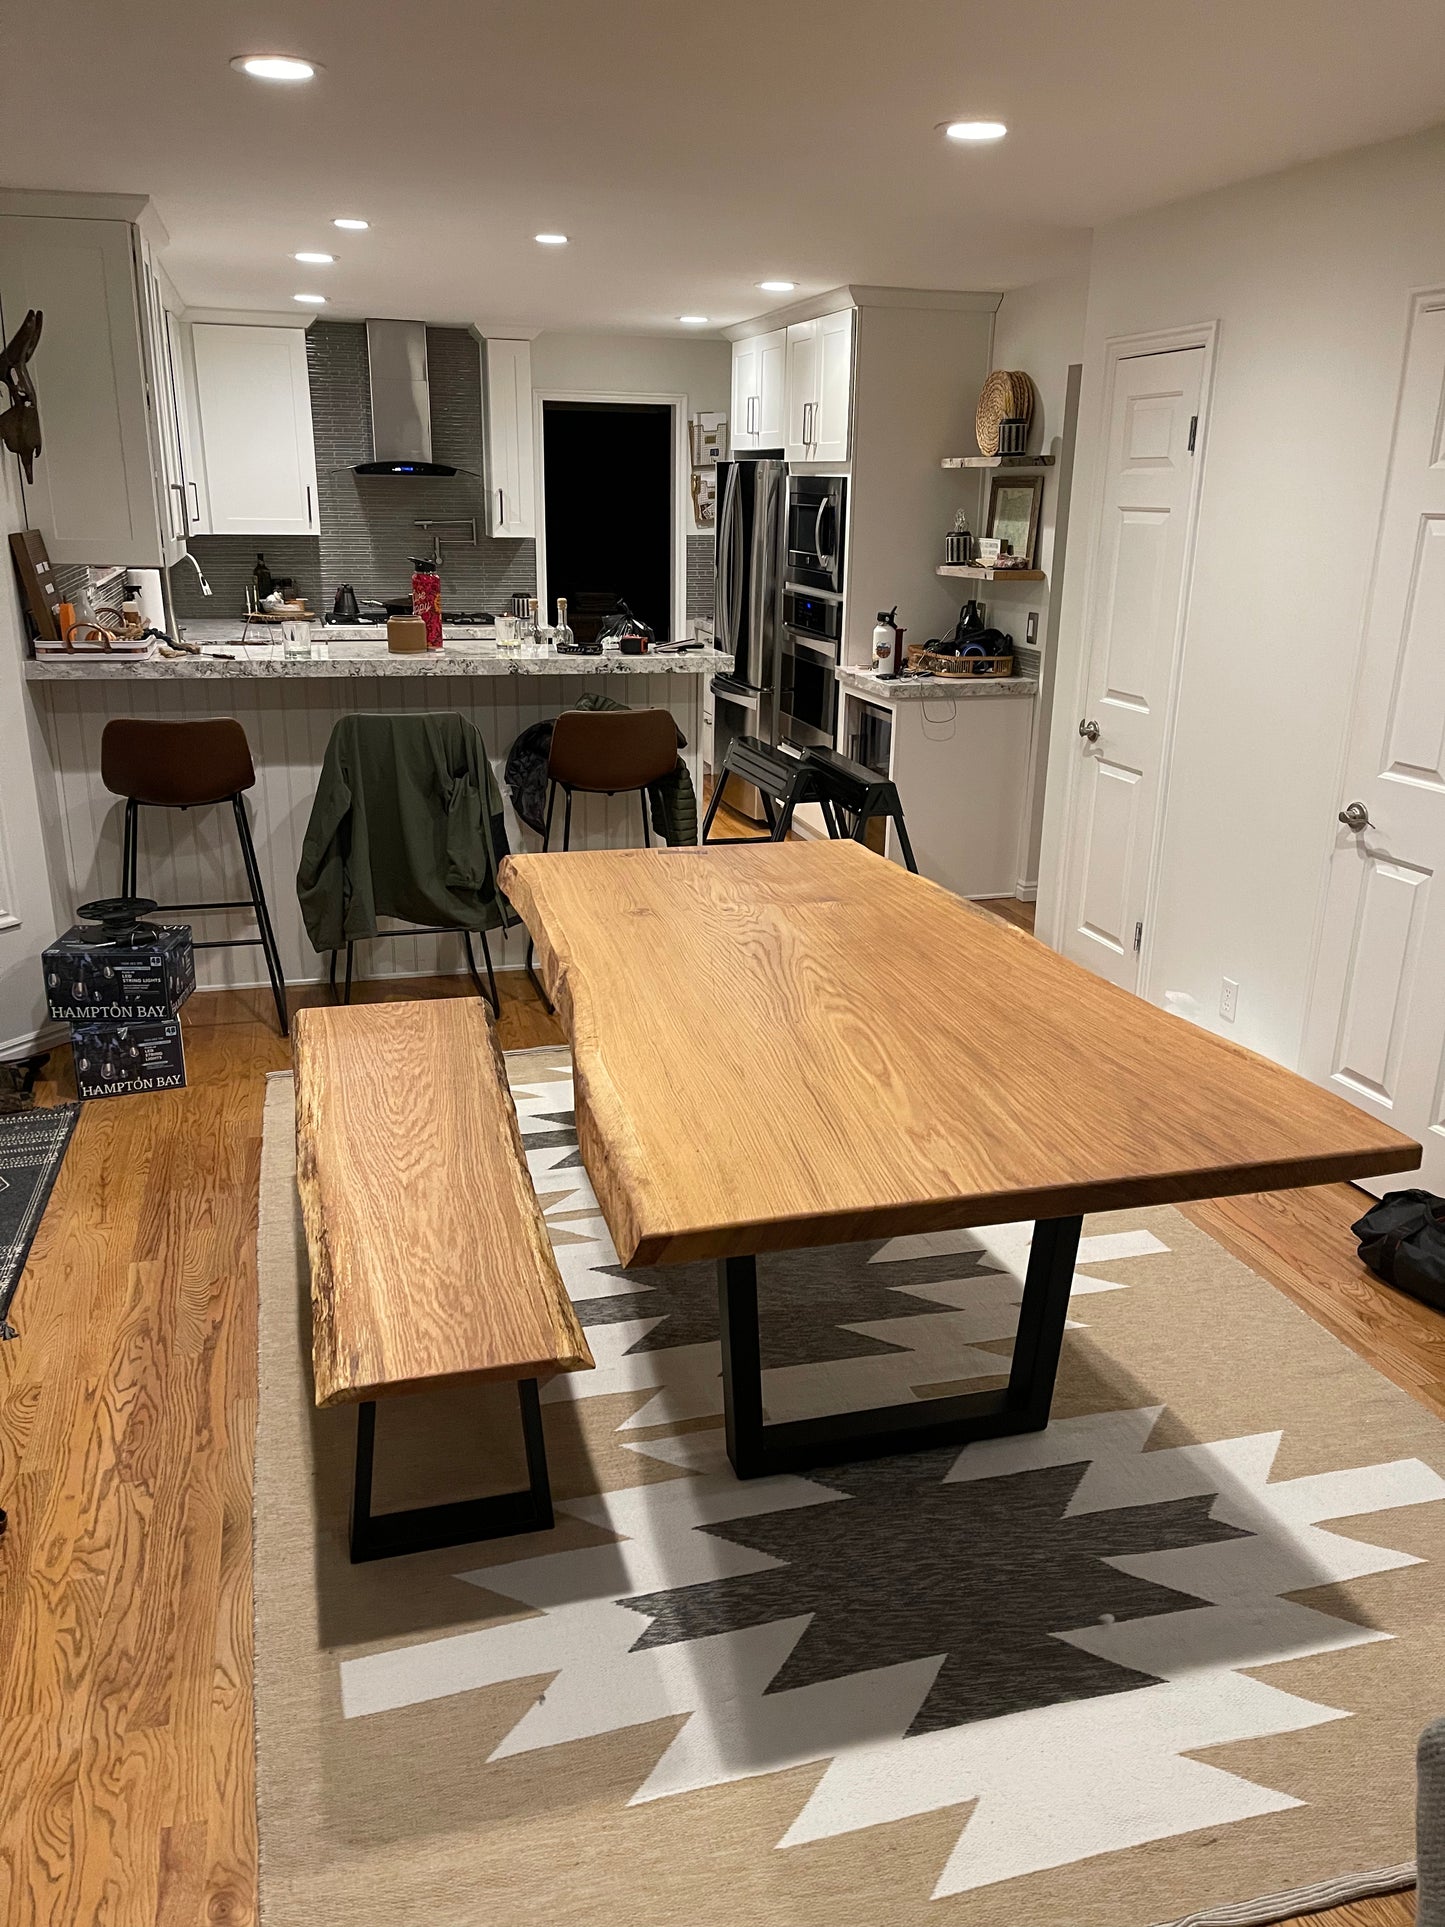 White Oak slab dining table and matching bench set